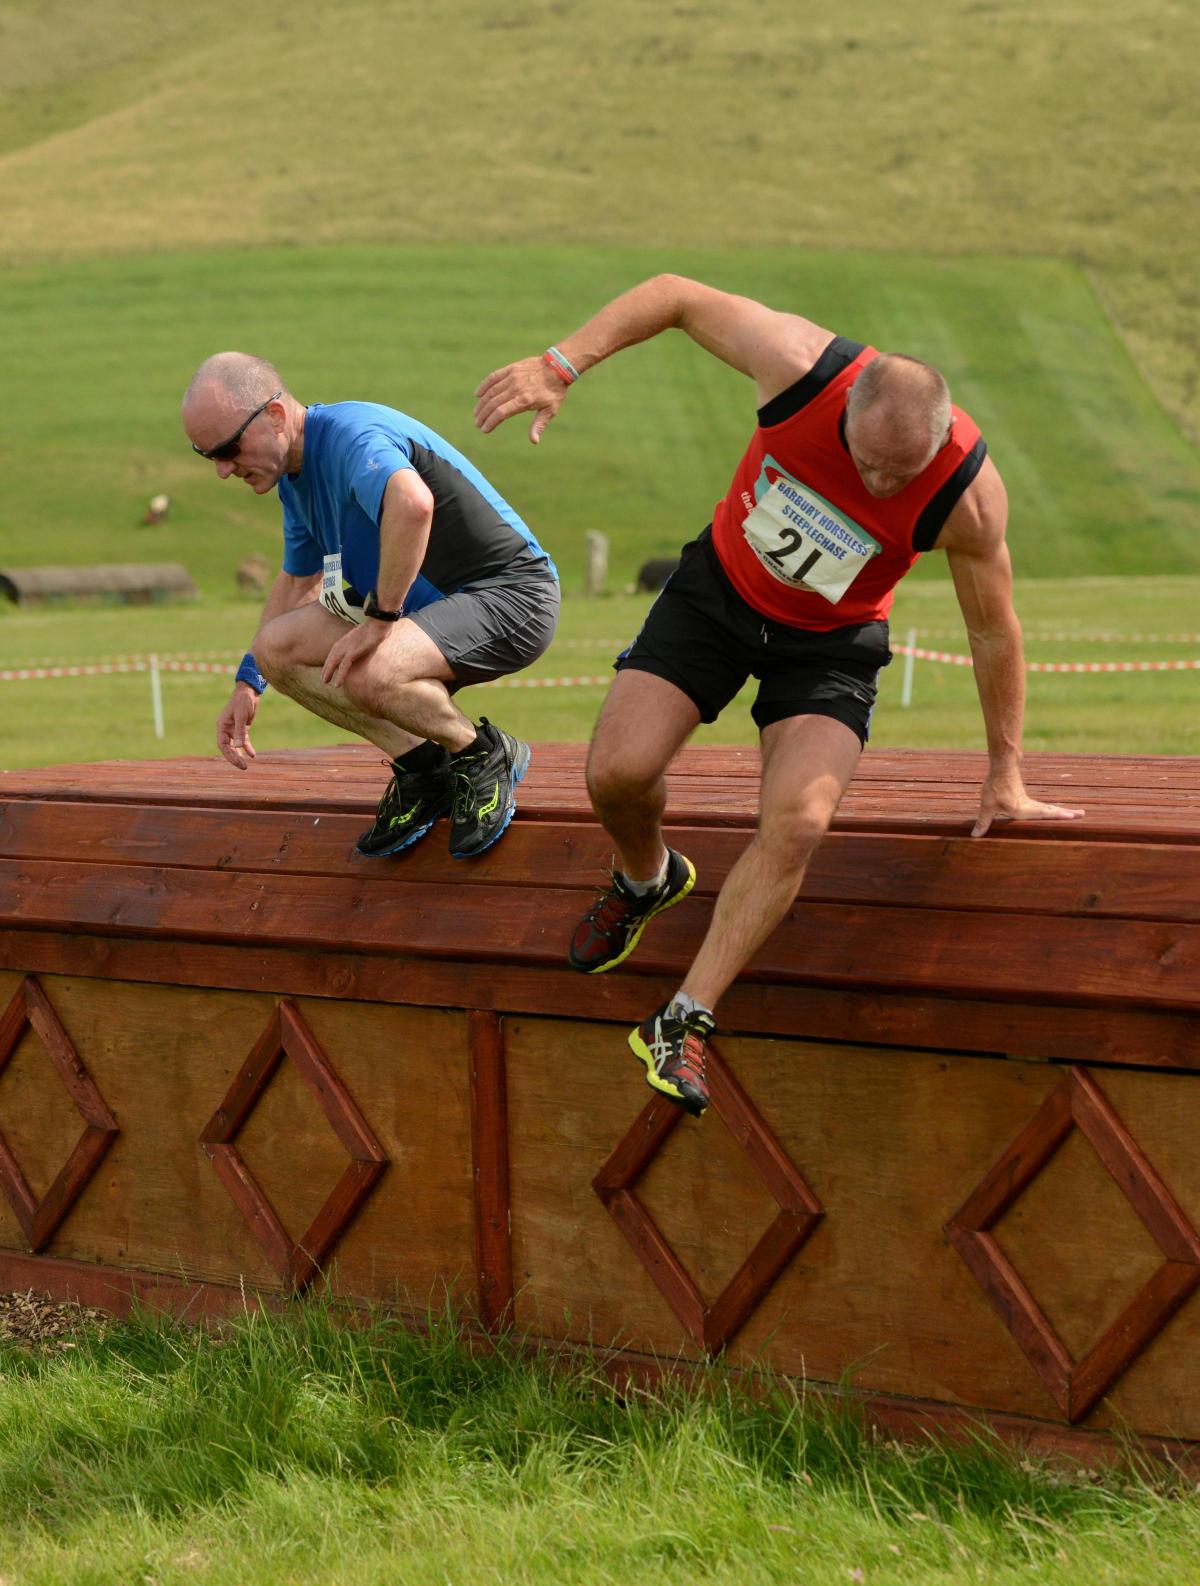 Action from the Horseless Steeplechase at Barbury captured by Clare Green